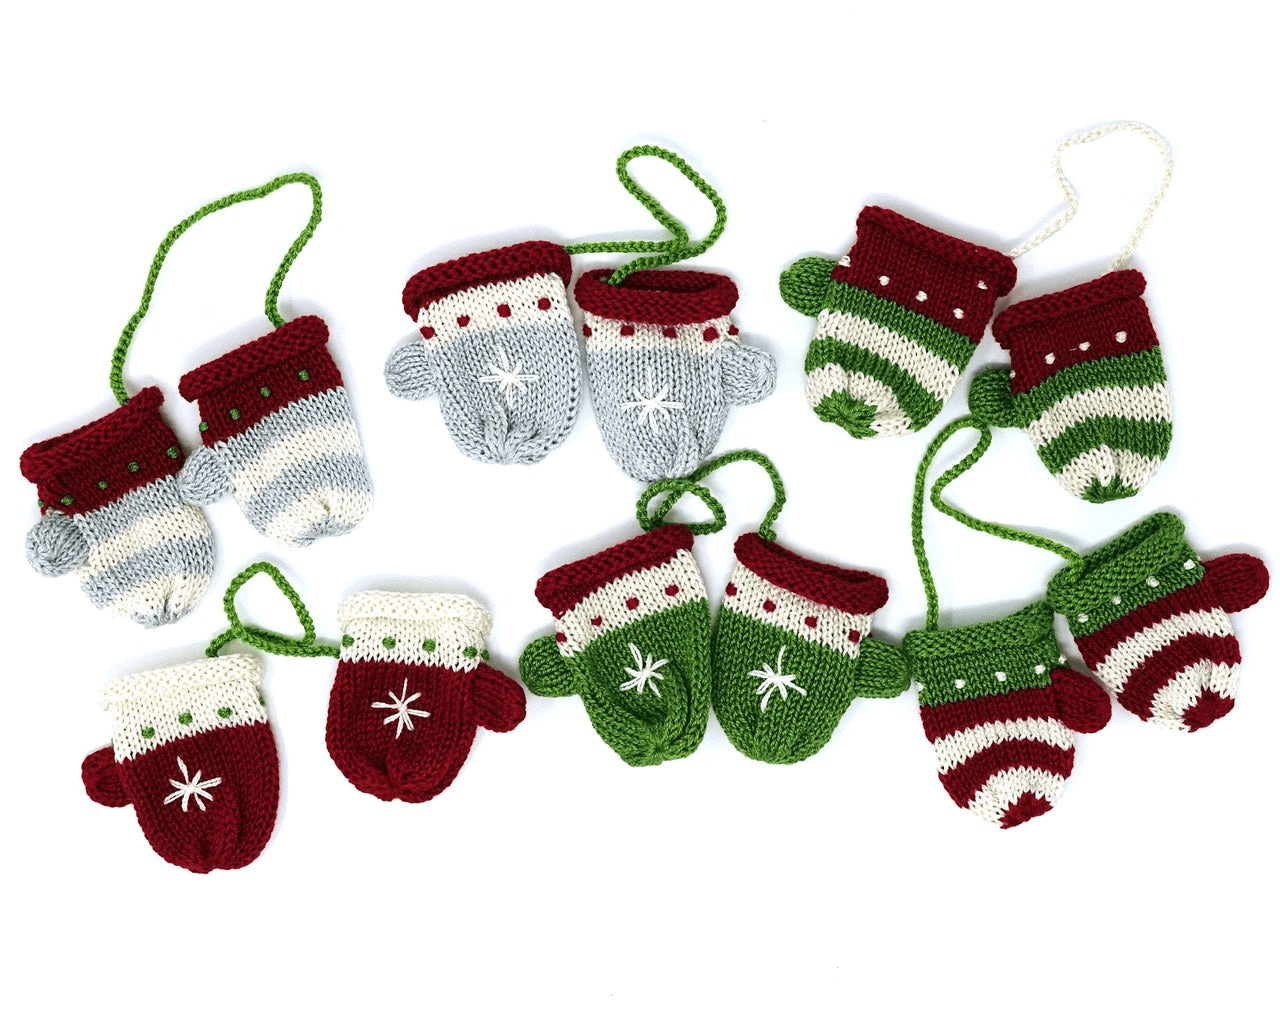 Pair of Mittens Ornaments- set of 6